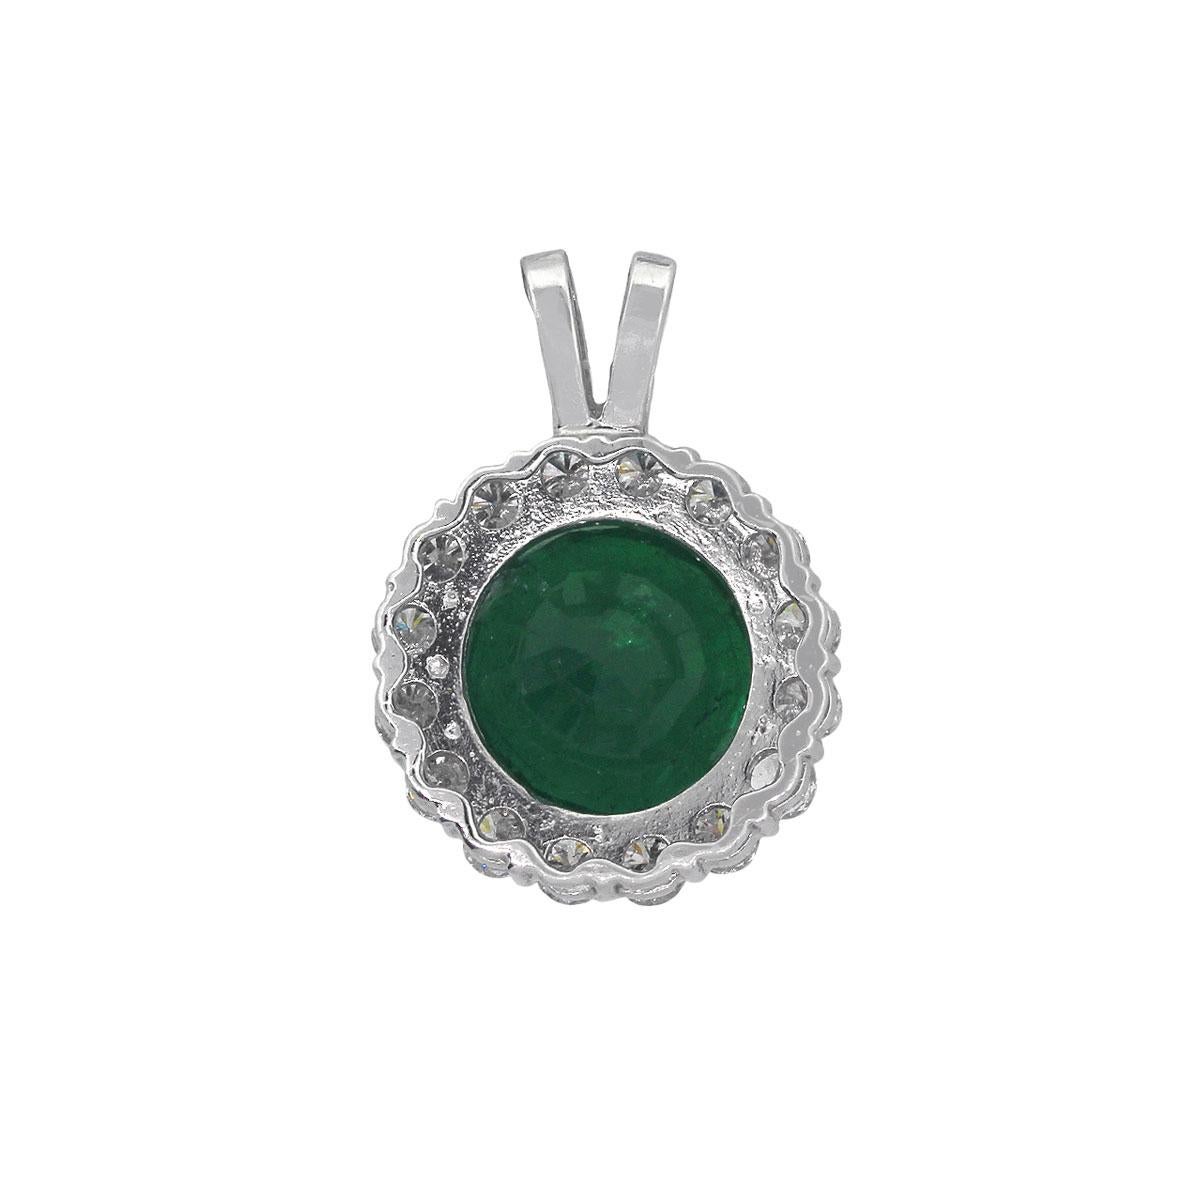 Material: 18k White Gold
Emerald Details: Approx. 10.67ct round cut emerald.
Diamond Details: Approx. 1.74ctw of round brilliant diamonds. Diamonds are G/H in color and SI in clarity.
Pendant Measurements: 0.74″ x 0.45″ x 0.86
Total Weight: 7.5g